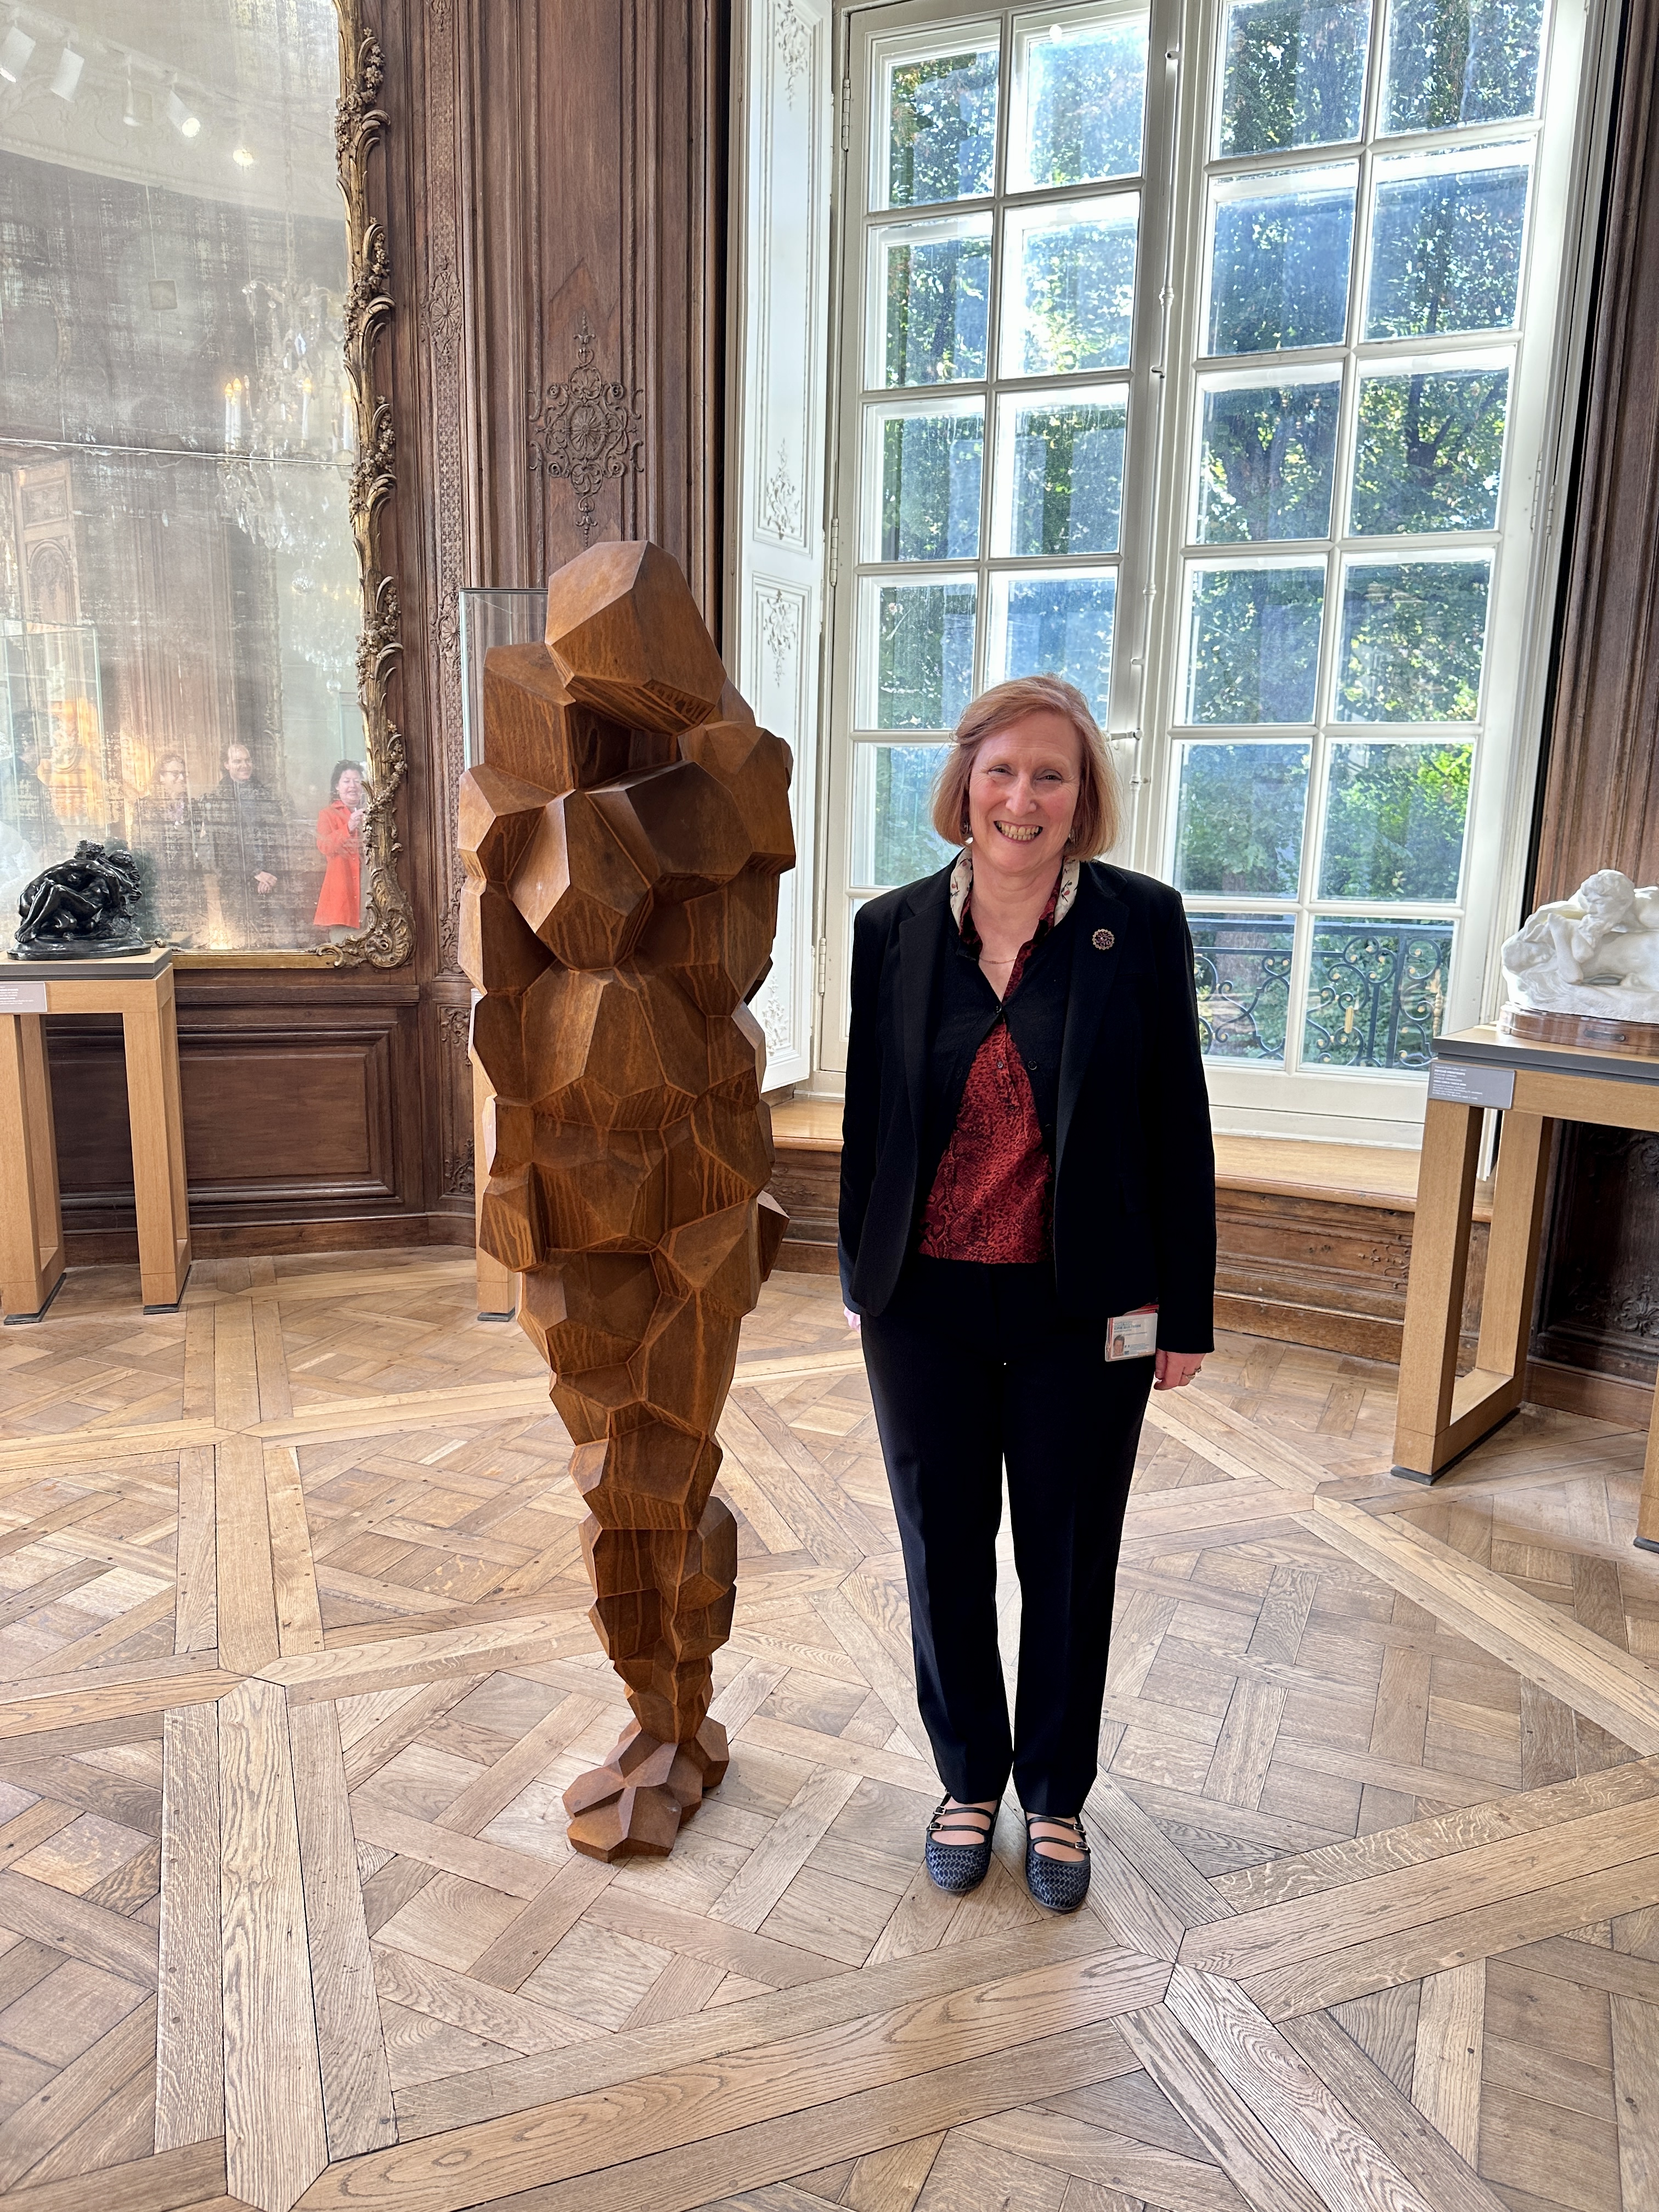 Exhibition Curator Sophie Biass-Fabiani with Antony Gormley sculpture